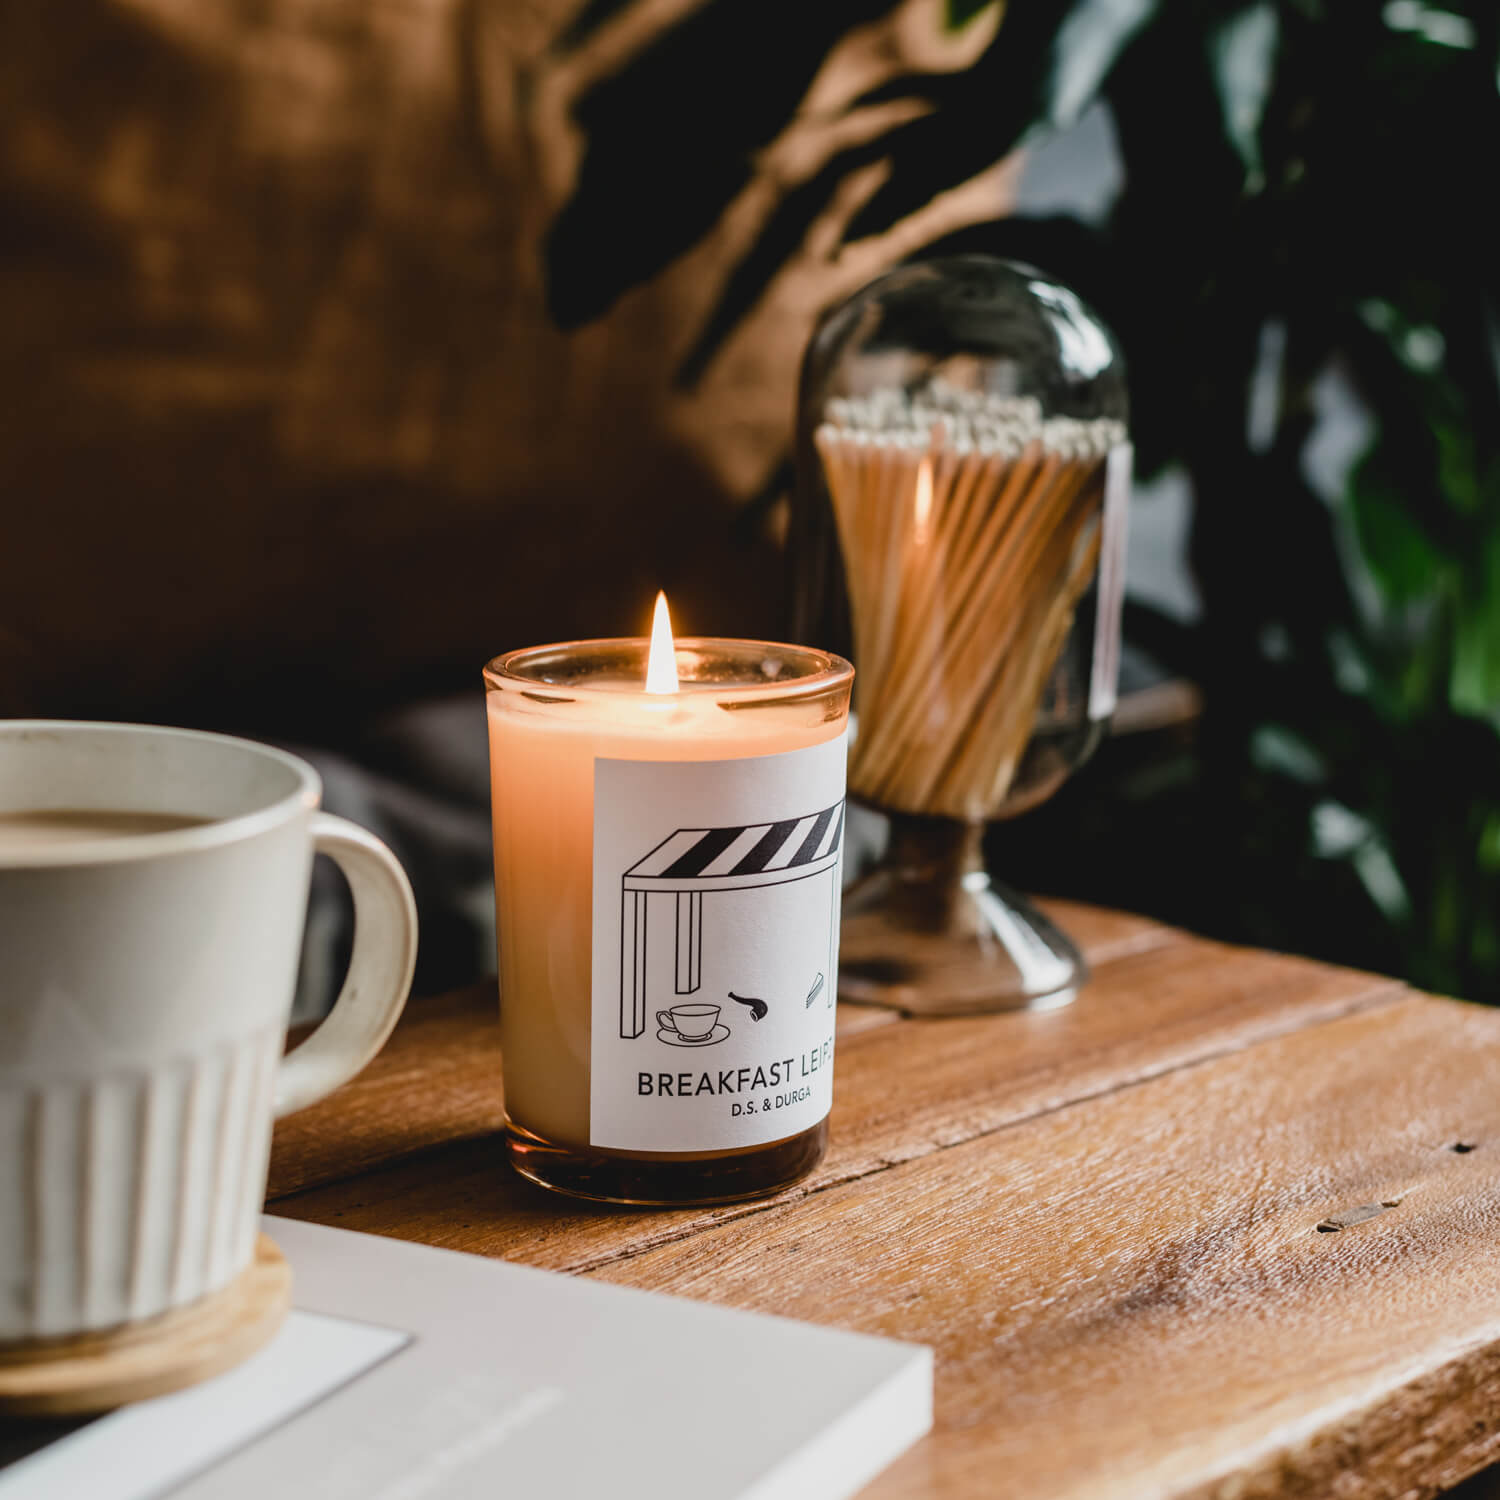 Breakfast Leipzig Scented Candle by D.S. & DURGA